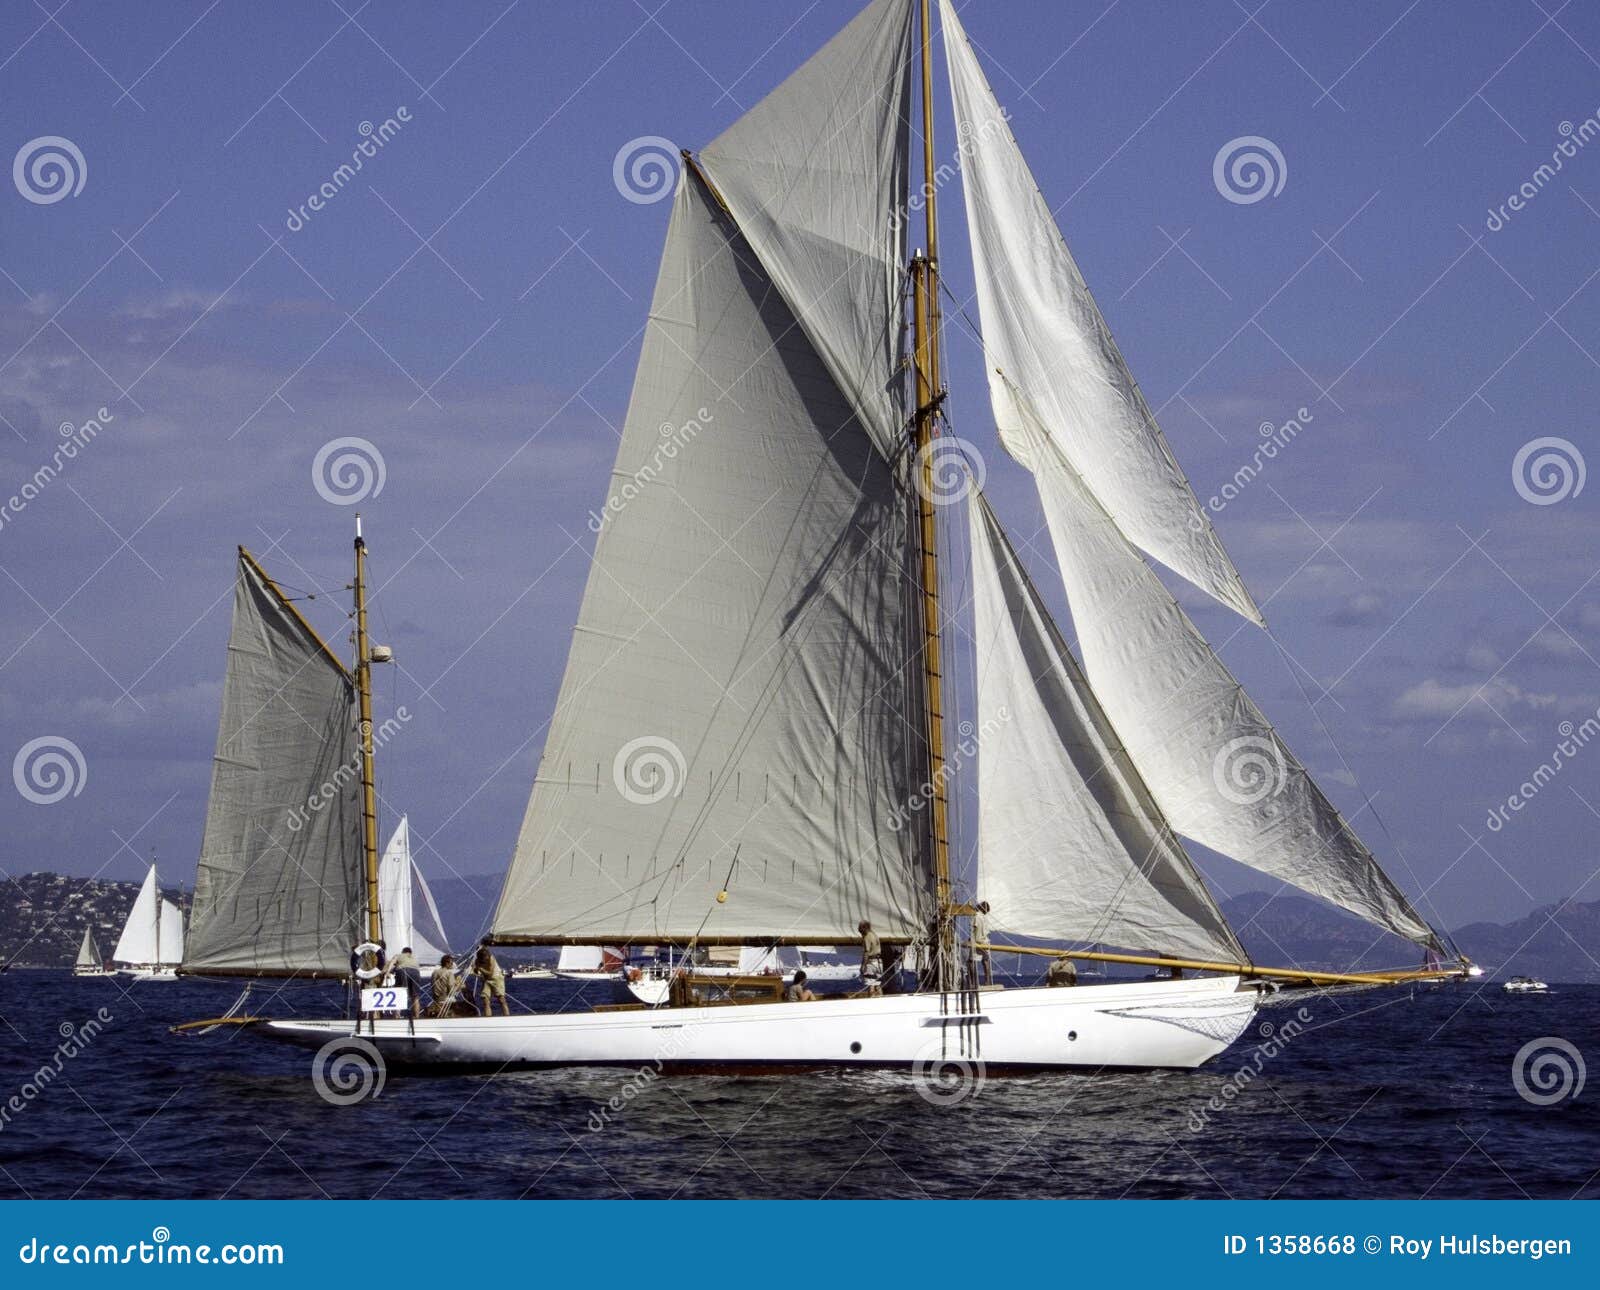 Gaff rigged yacht stock photo. Image of ketch, competition 